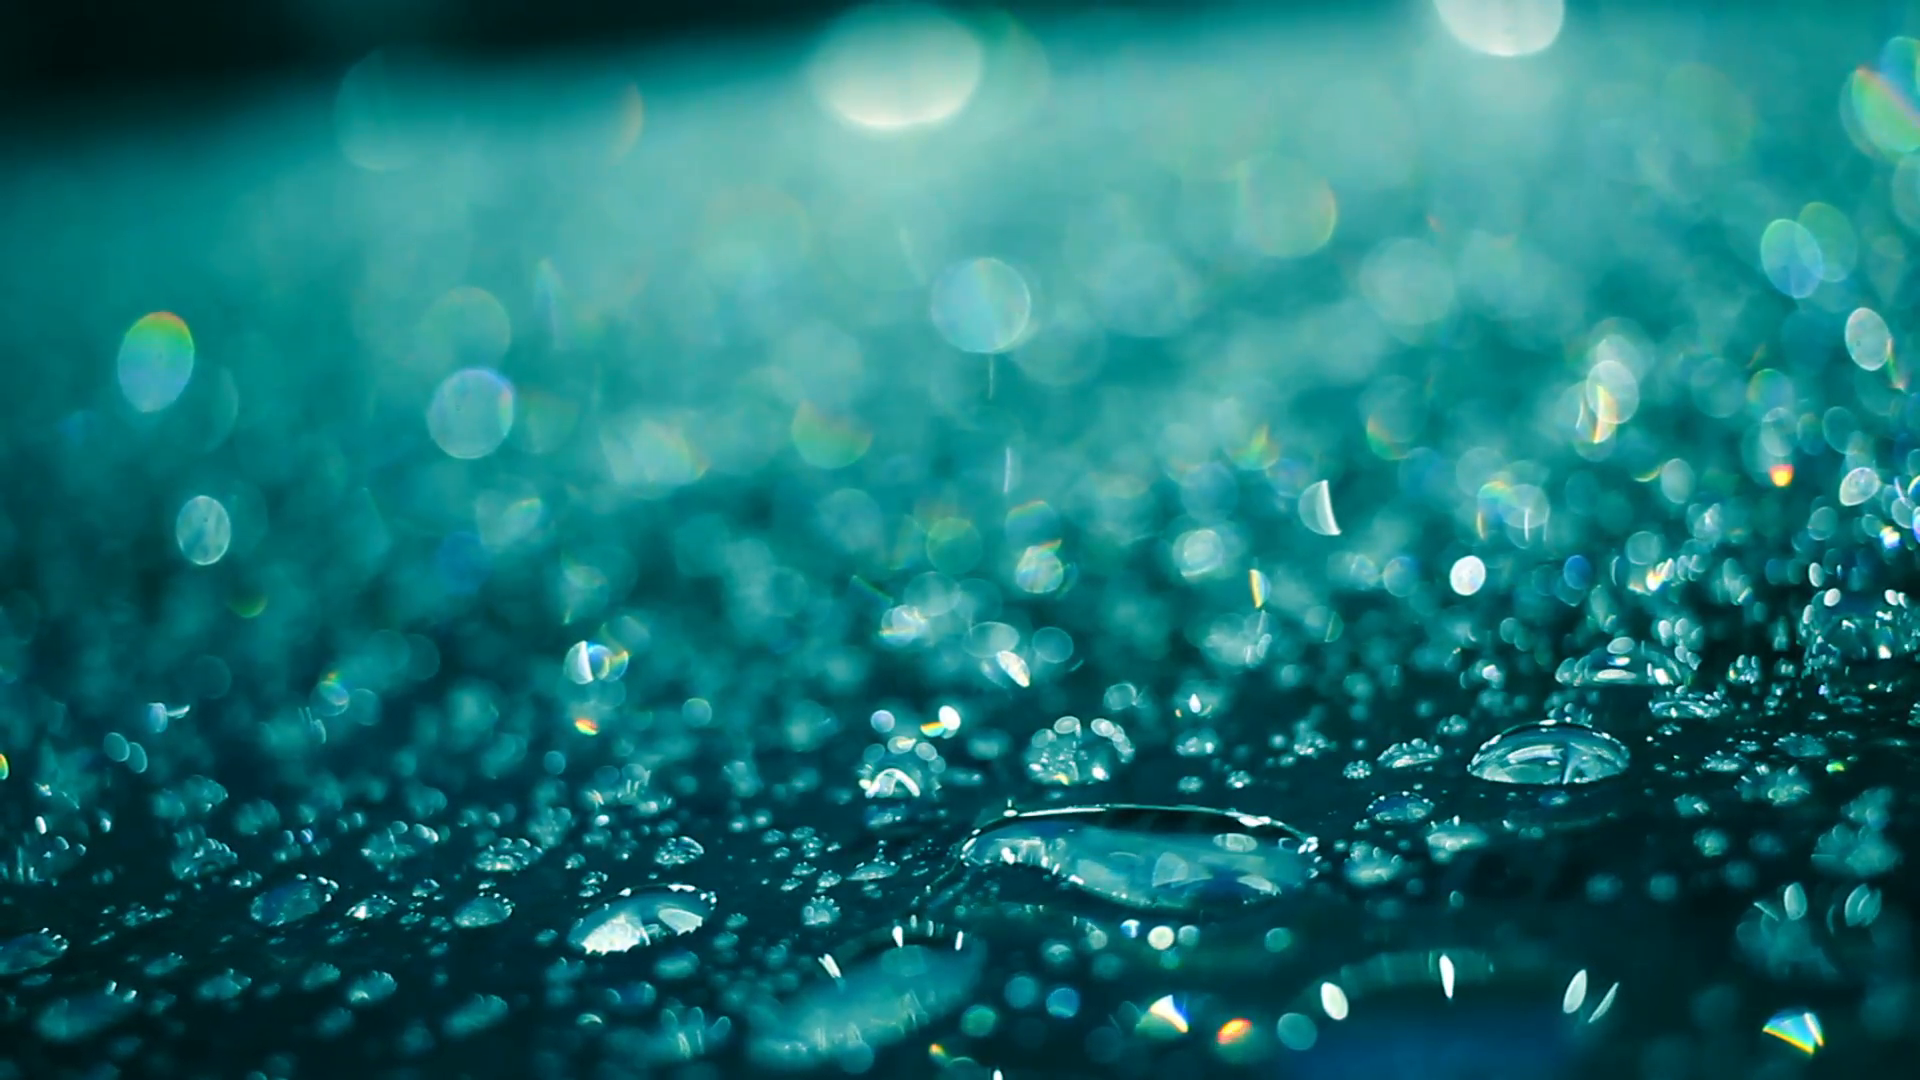 Rain drops on glass surface in aquamarine color. Macro of droplets ...